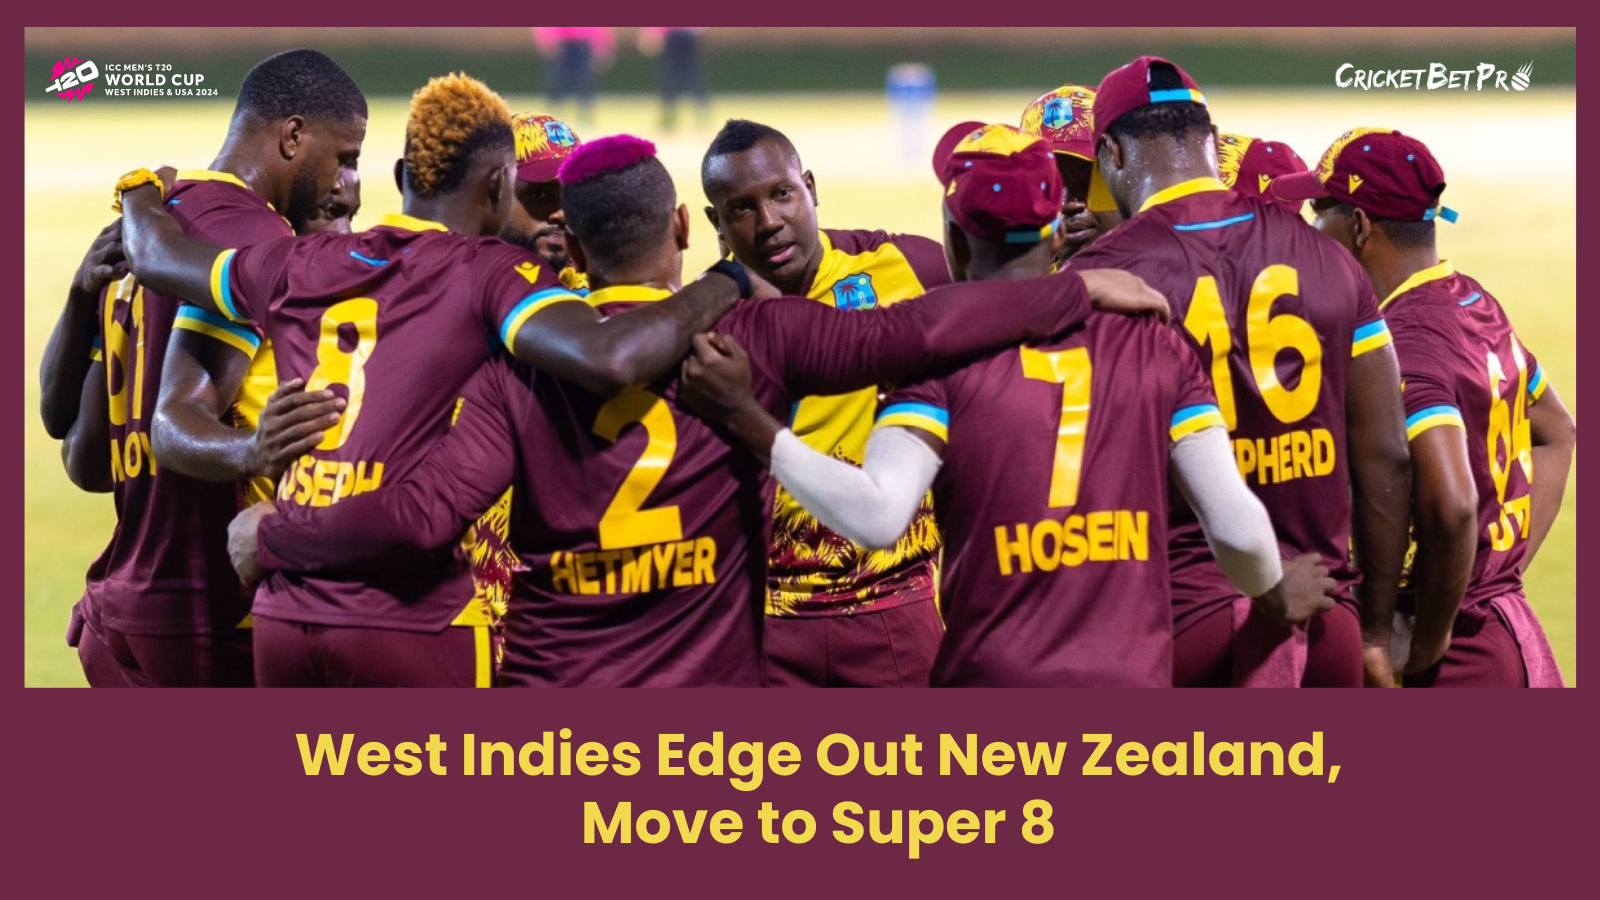 West Indies Edge Out New Zealand, Move to Super 8